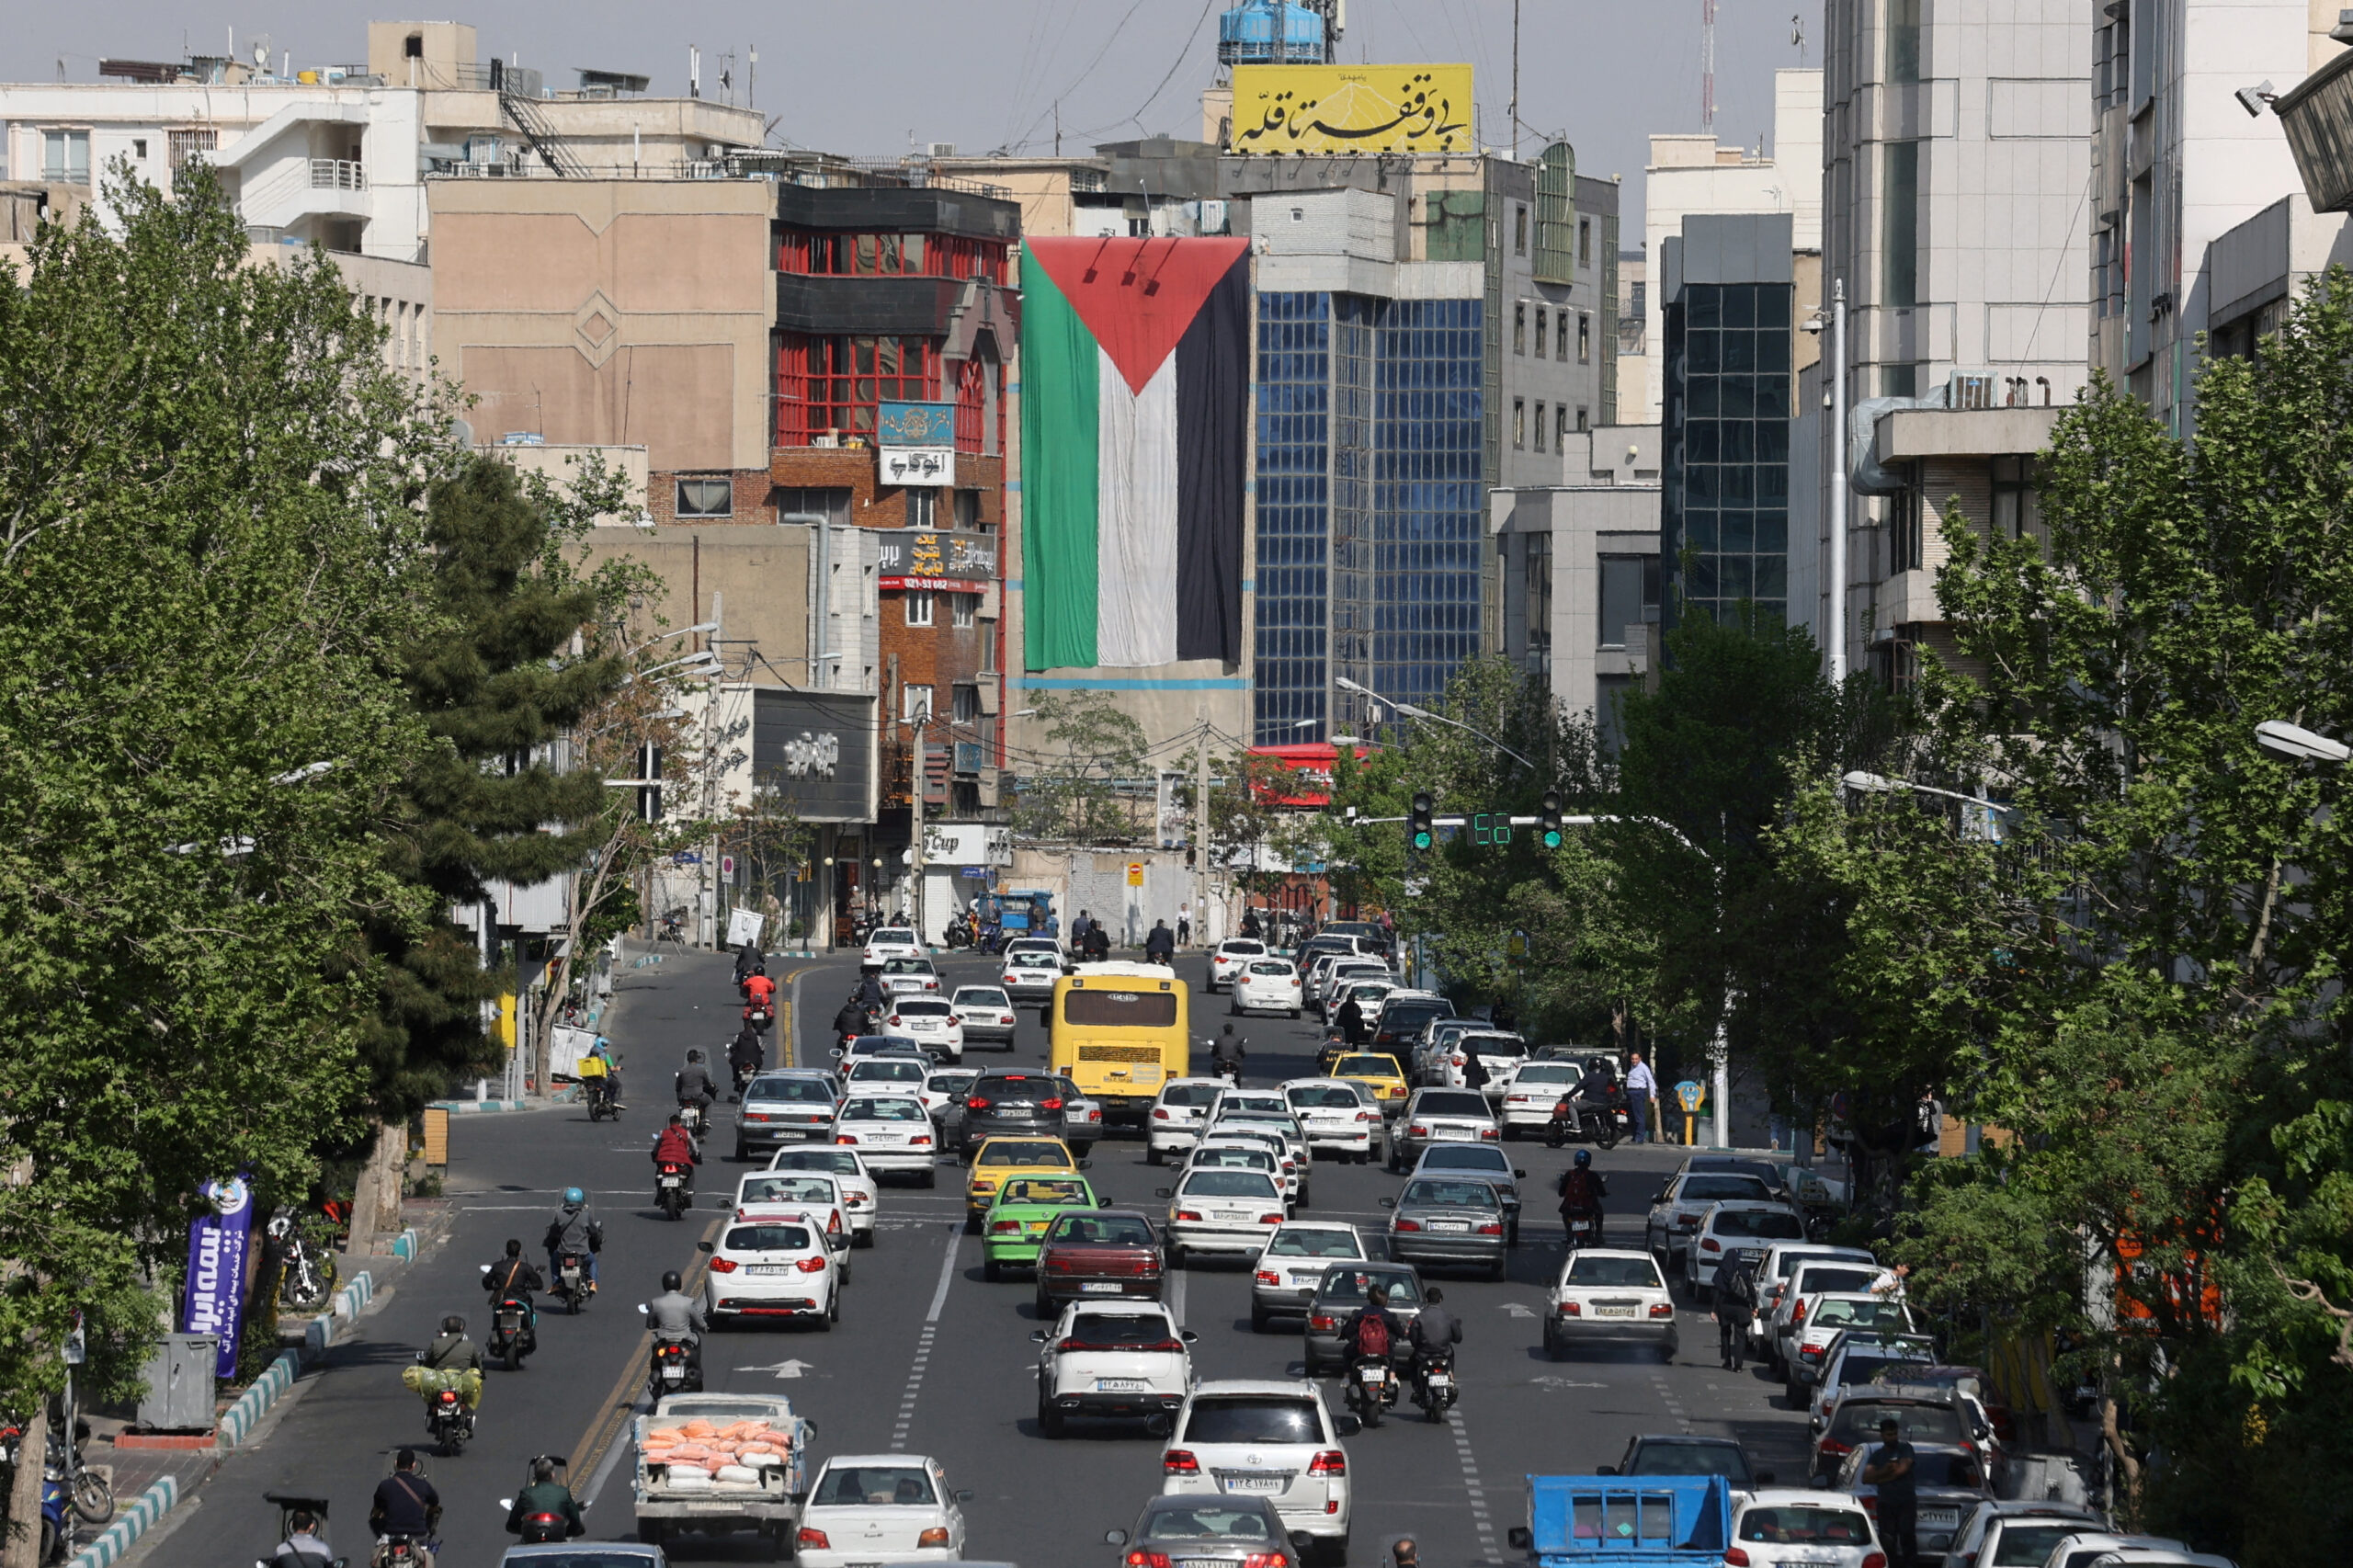 Iranians Anxious As Foreigners Leave And Israel Weighs Strike Response